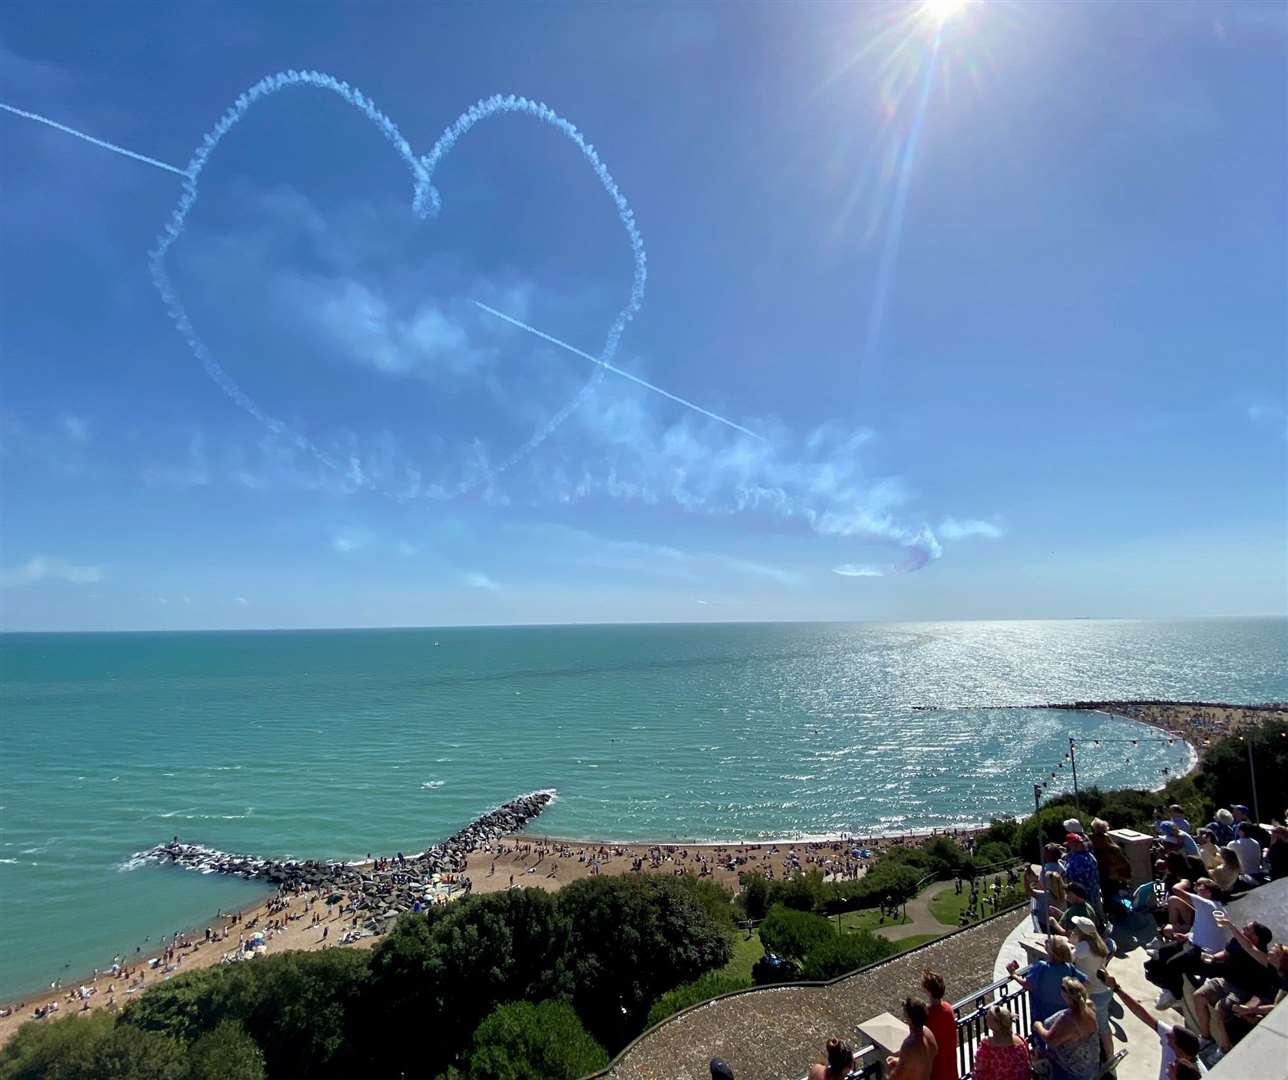 The Red Arrows showed their love for Folkestone on Sunday. Picture: Folkestone and Hythe District Council